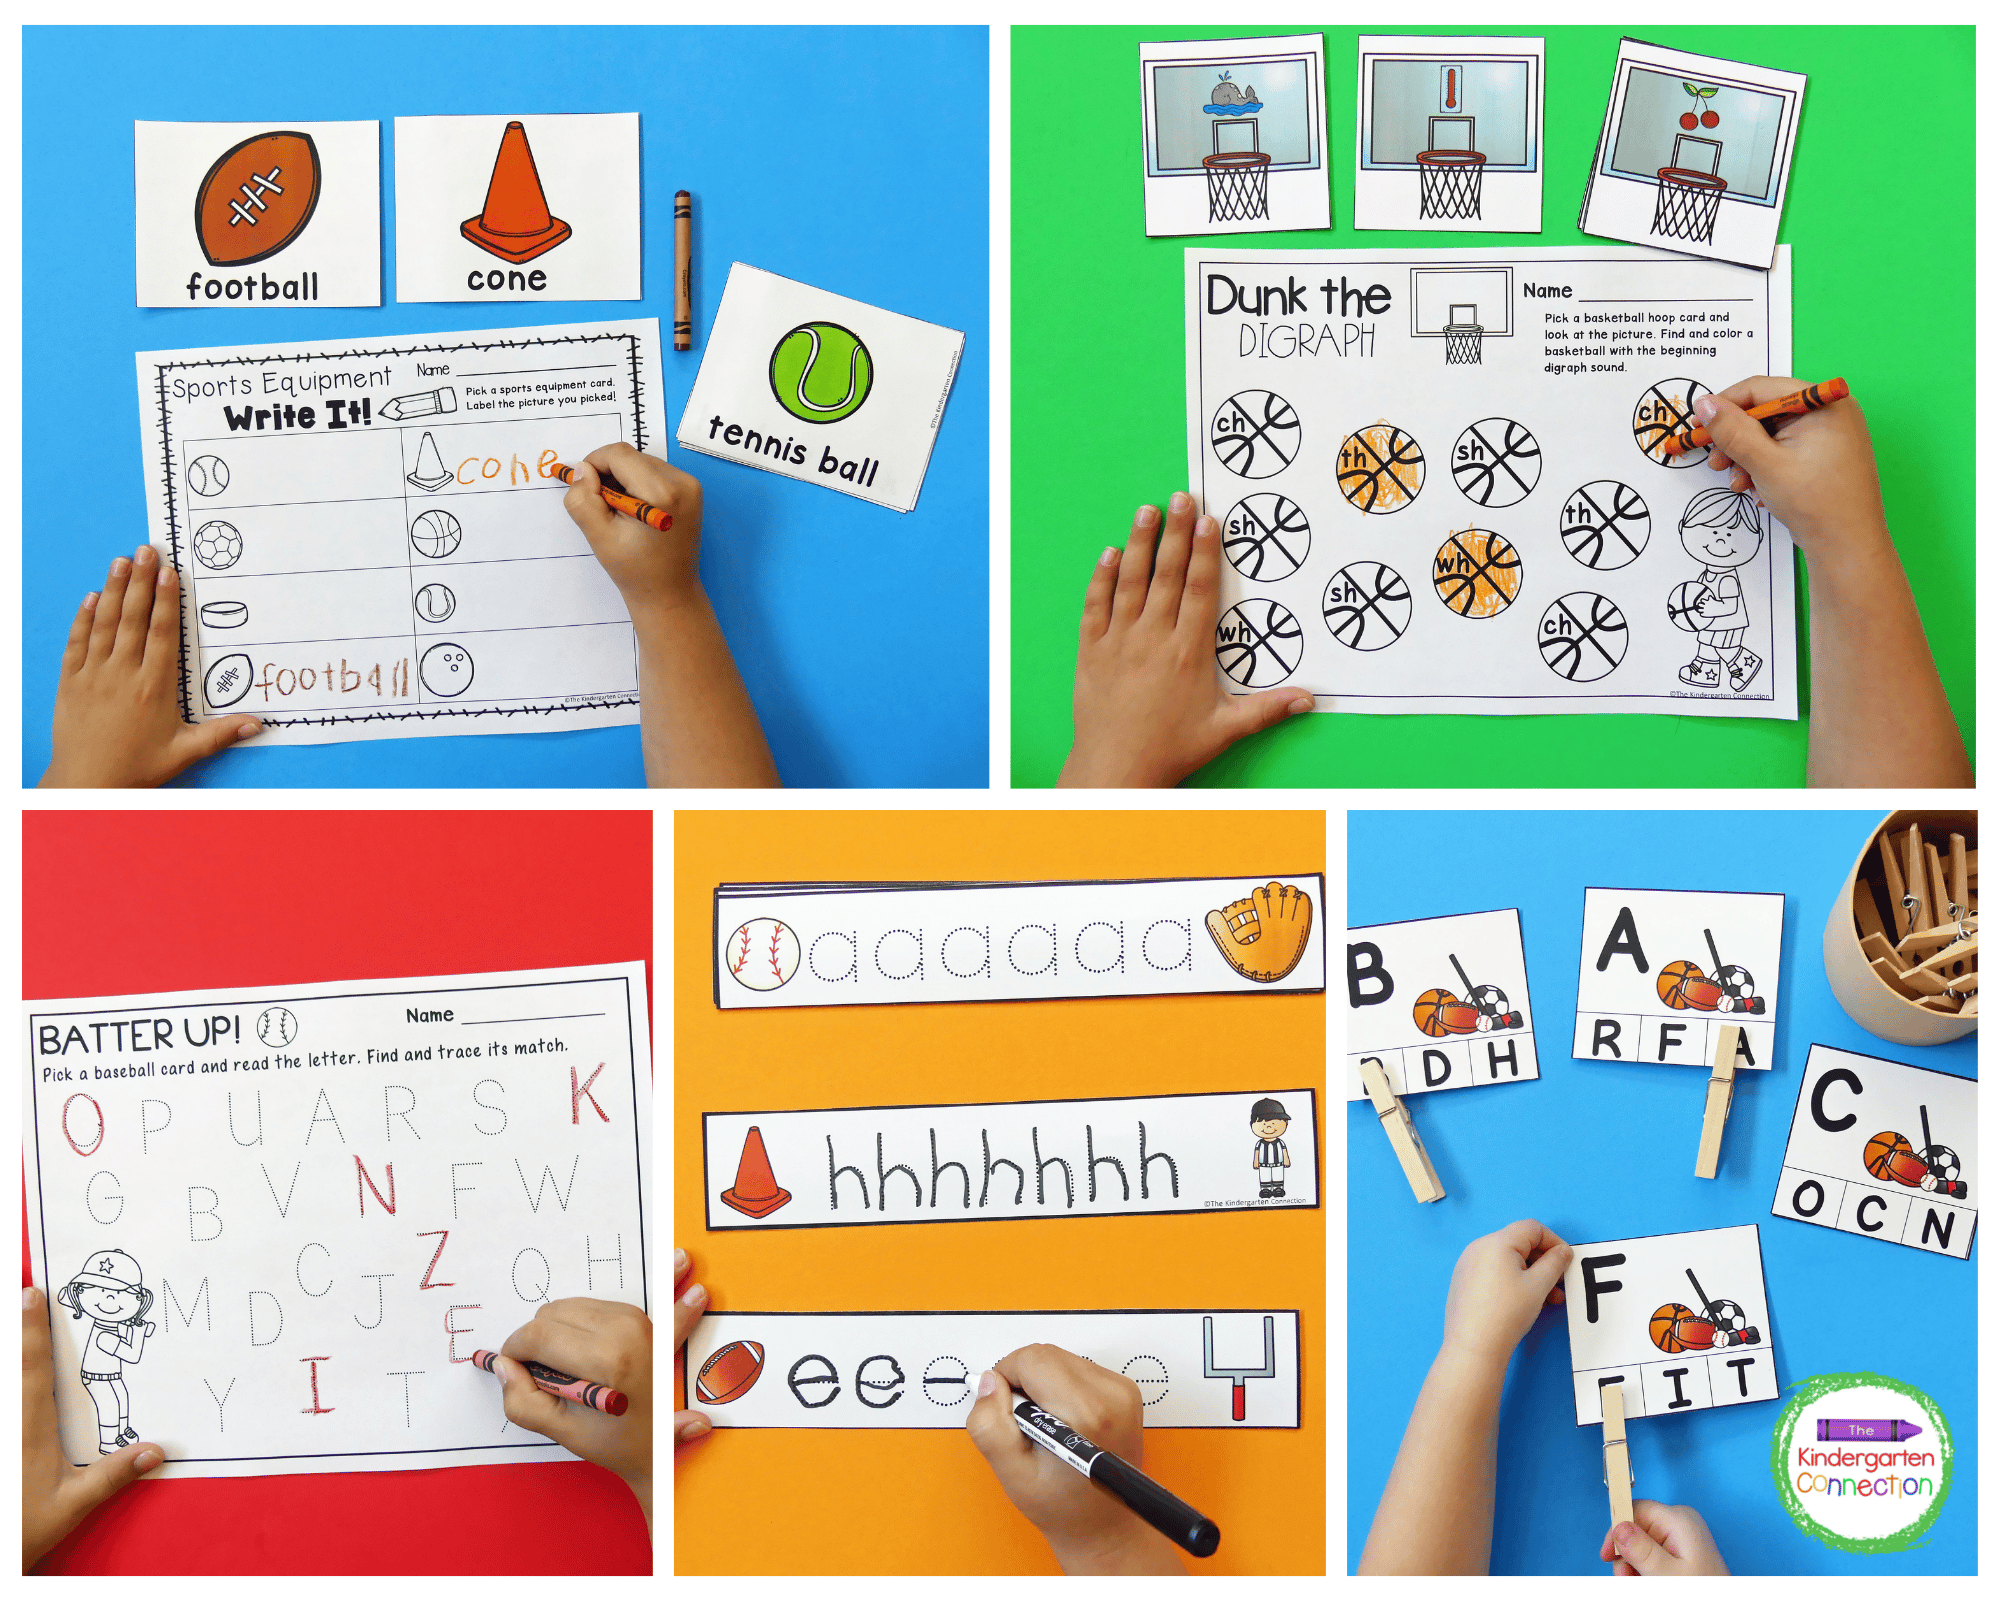 Inside this fun activity pack you will engaging and interactive literacy centers to strengthen skills.